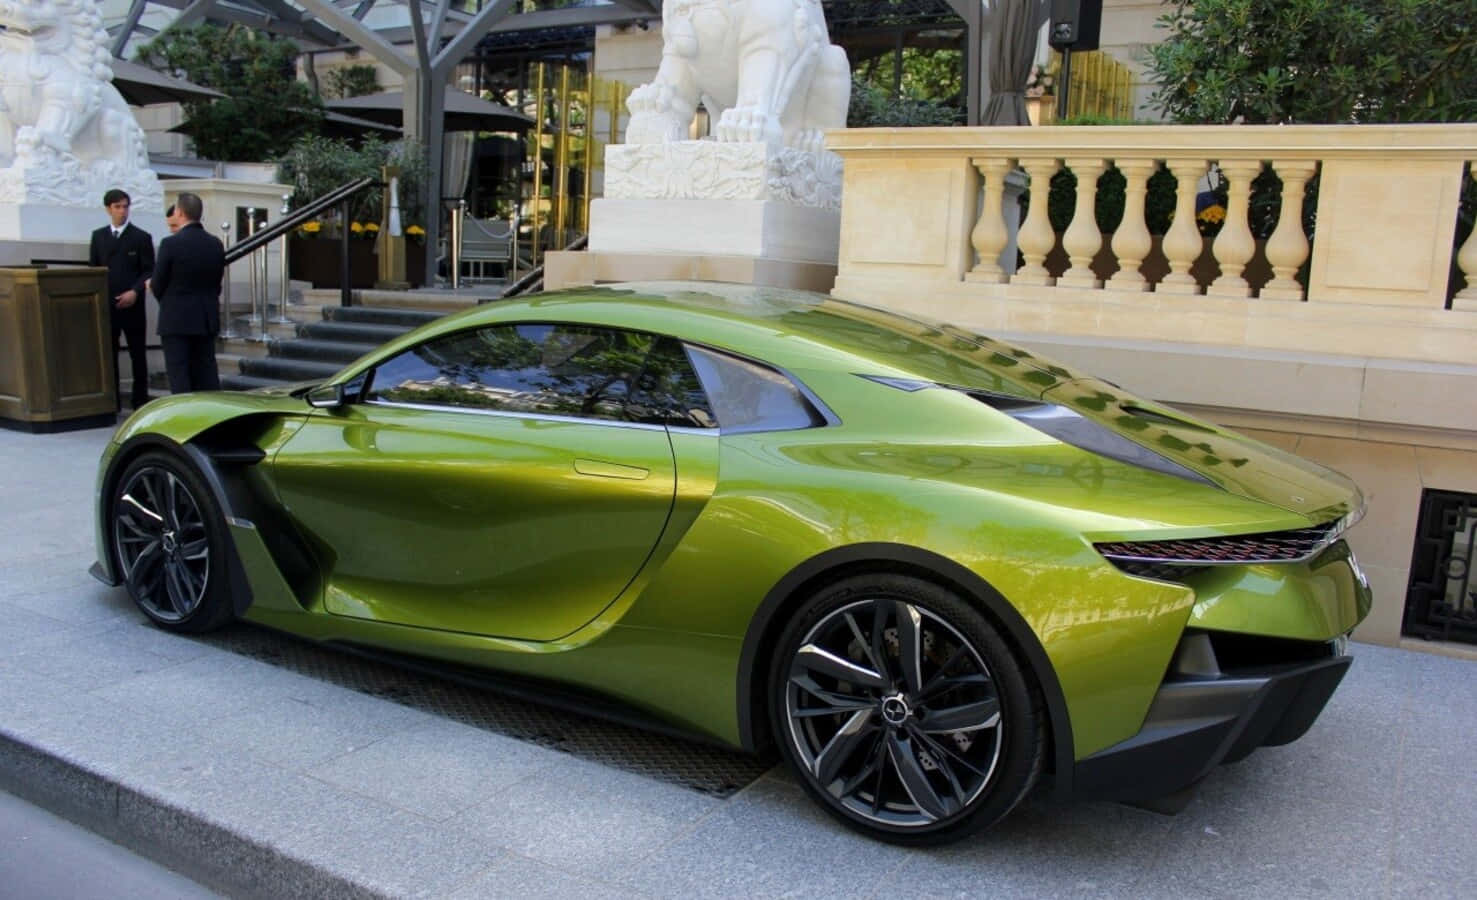 Modern Design Of Ds Automobiles Ds E-tense On Display Wallpaper